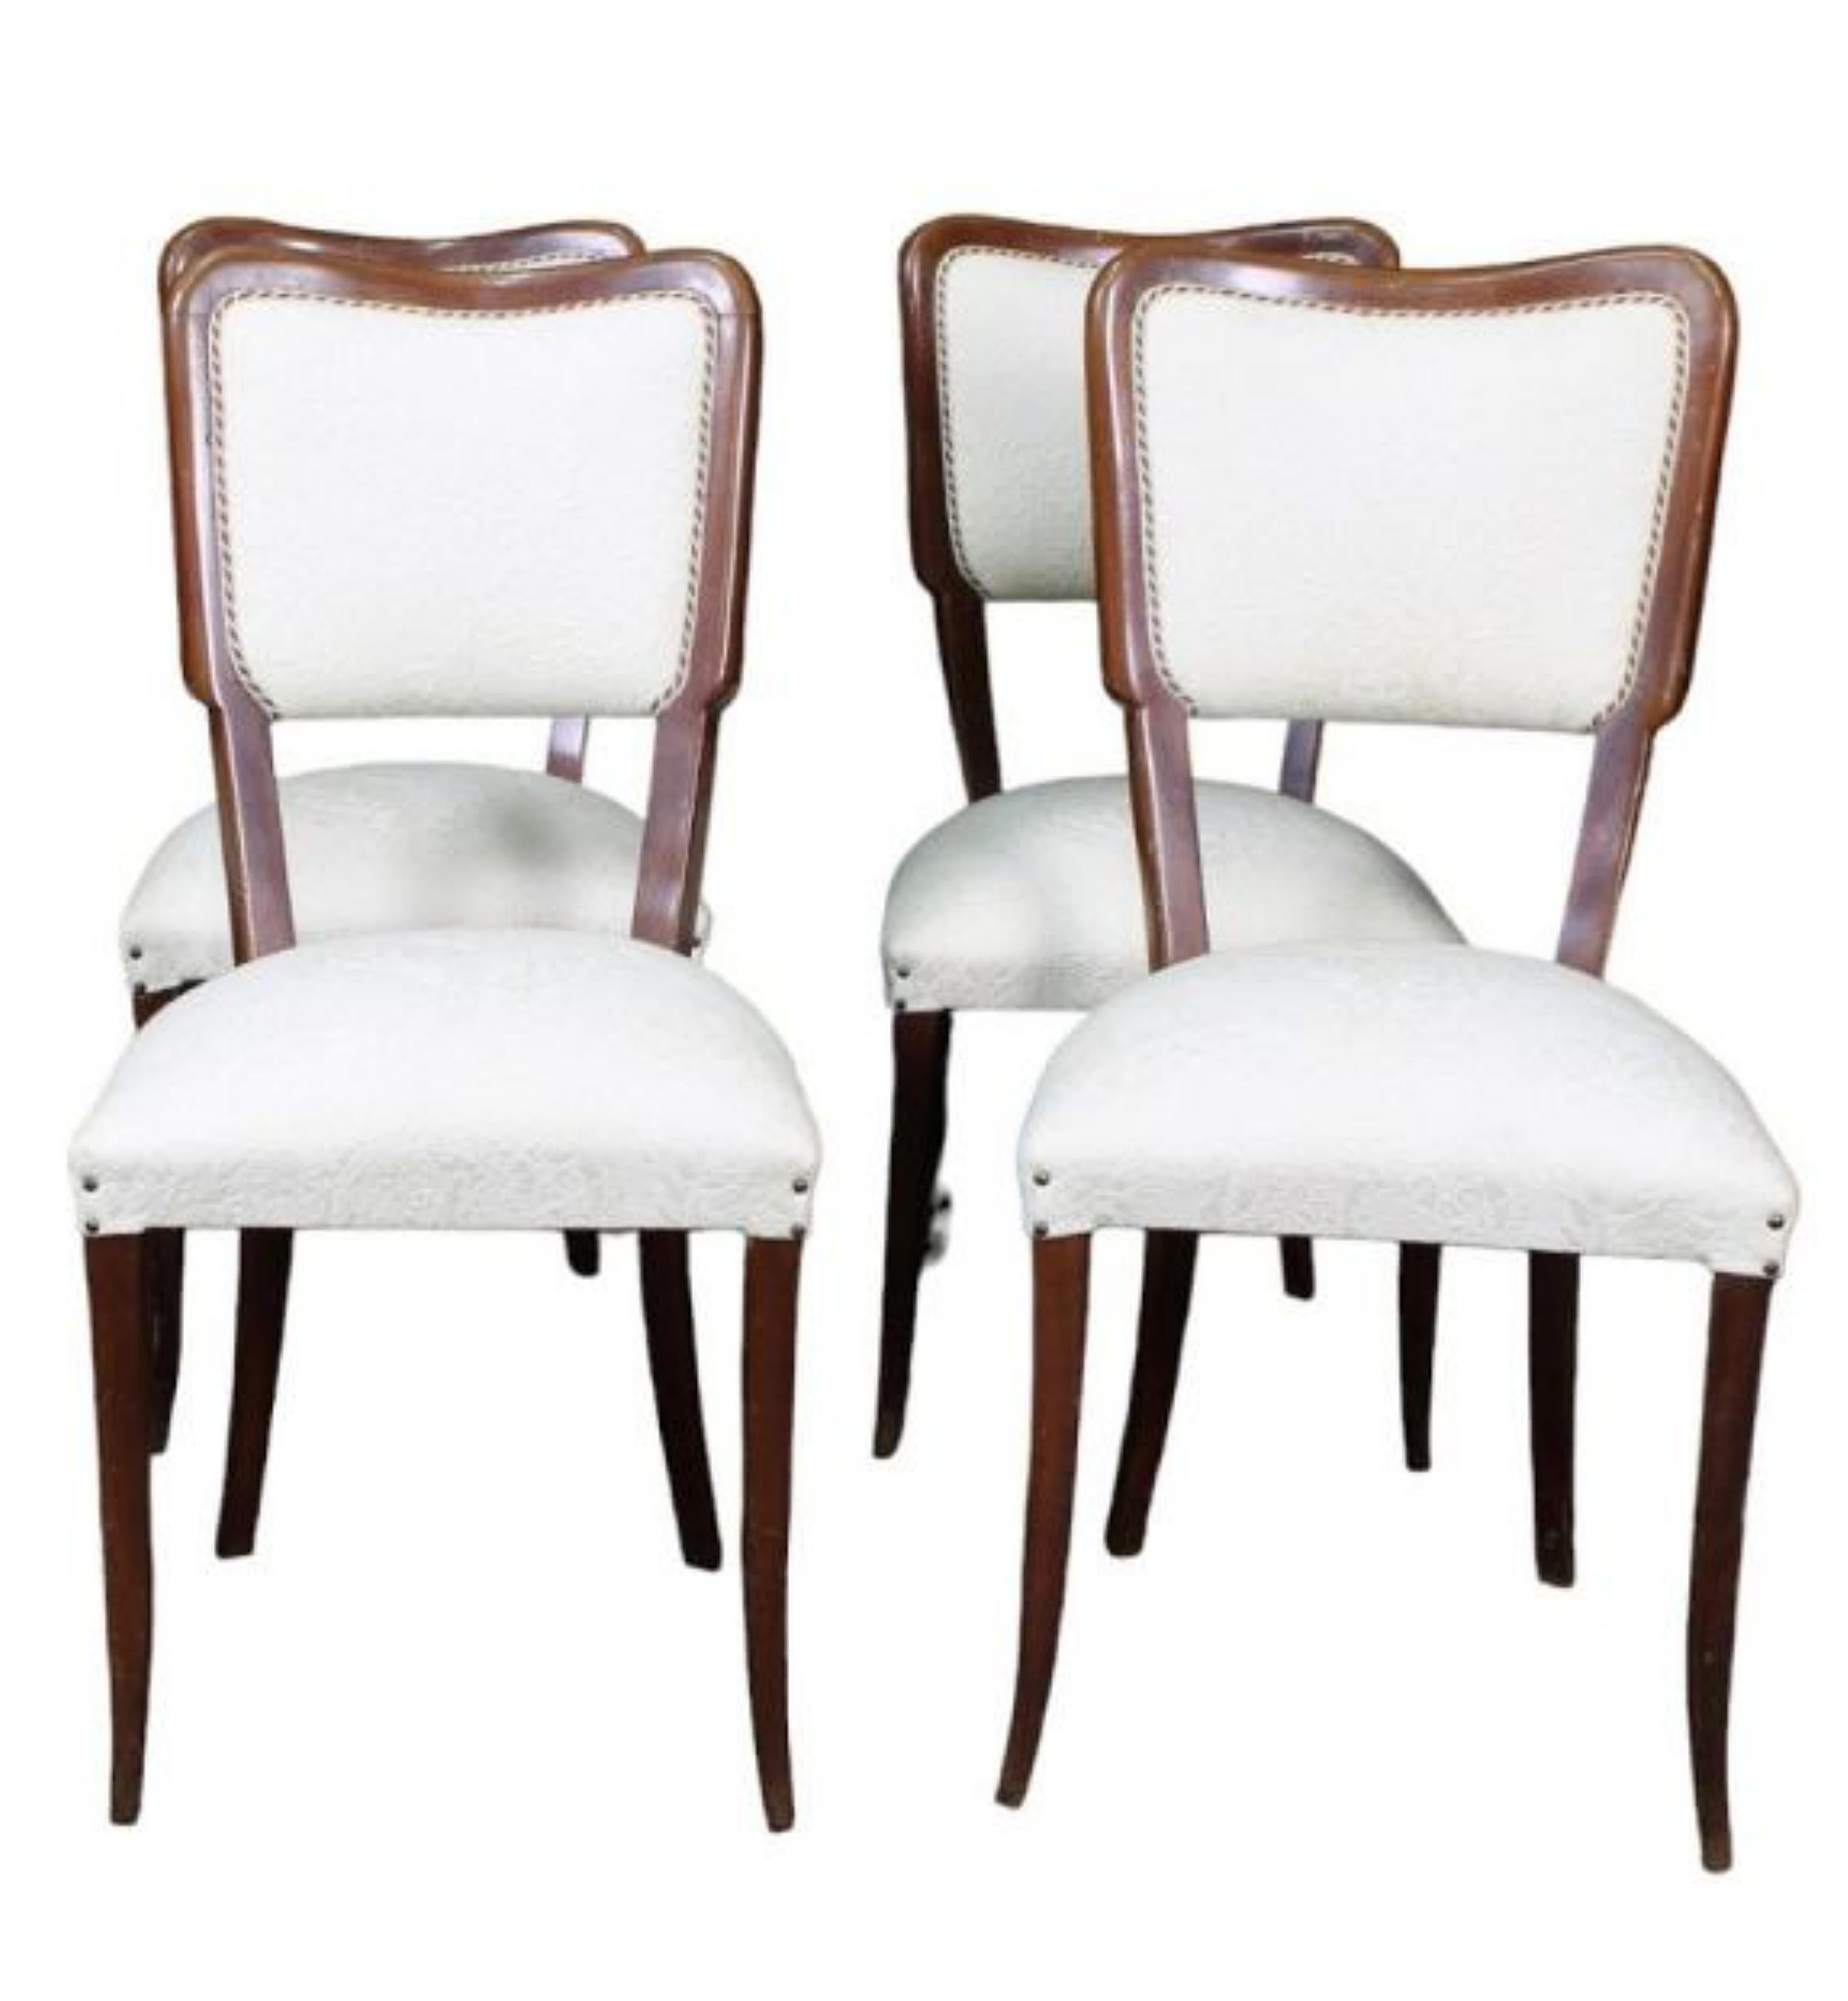 Six Chairs with a Pair of 20th Century Italian Armchairs

SIX CHAIRS
in walnut with Italian vintage white fabric h 95.5 x 45 x 45cm 
PAIR OF ARMCHAIRS
in walnut with Italian vintage white fabric h 92 x 60 x 56cm 
good conditions